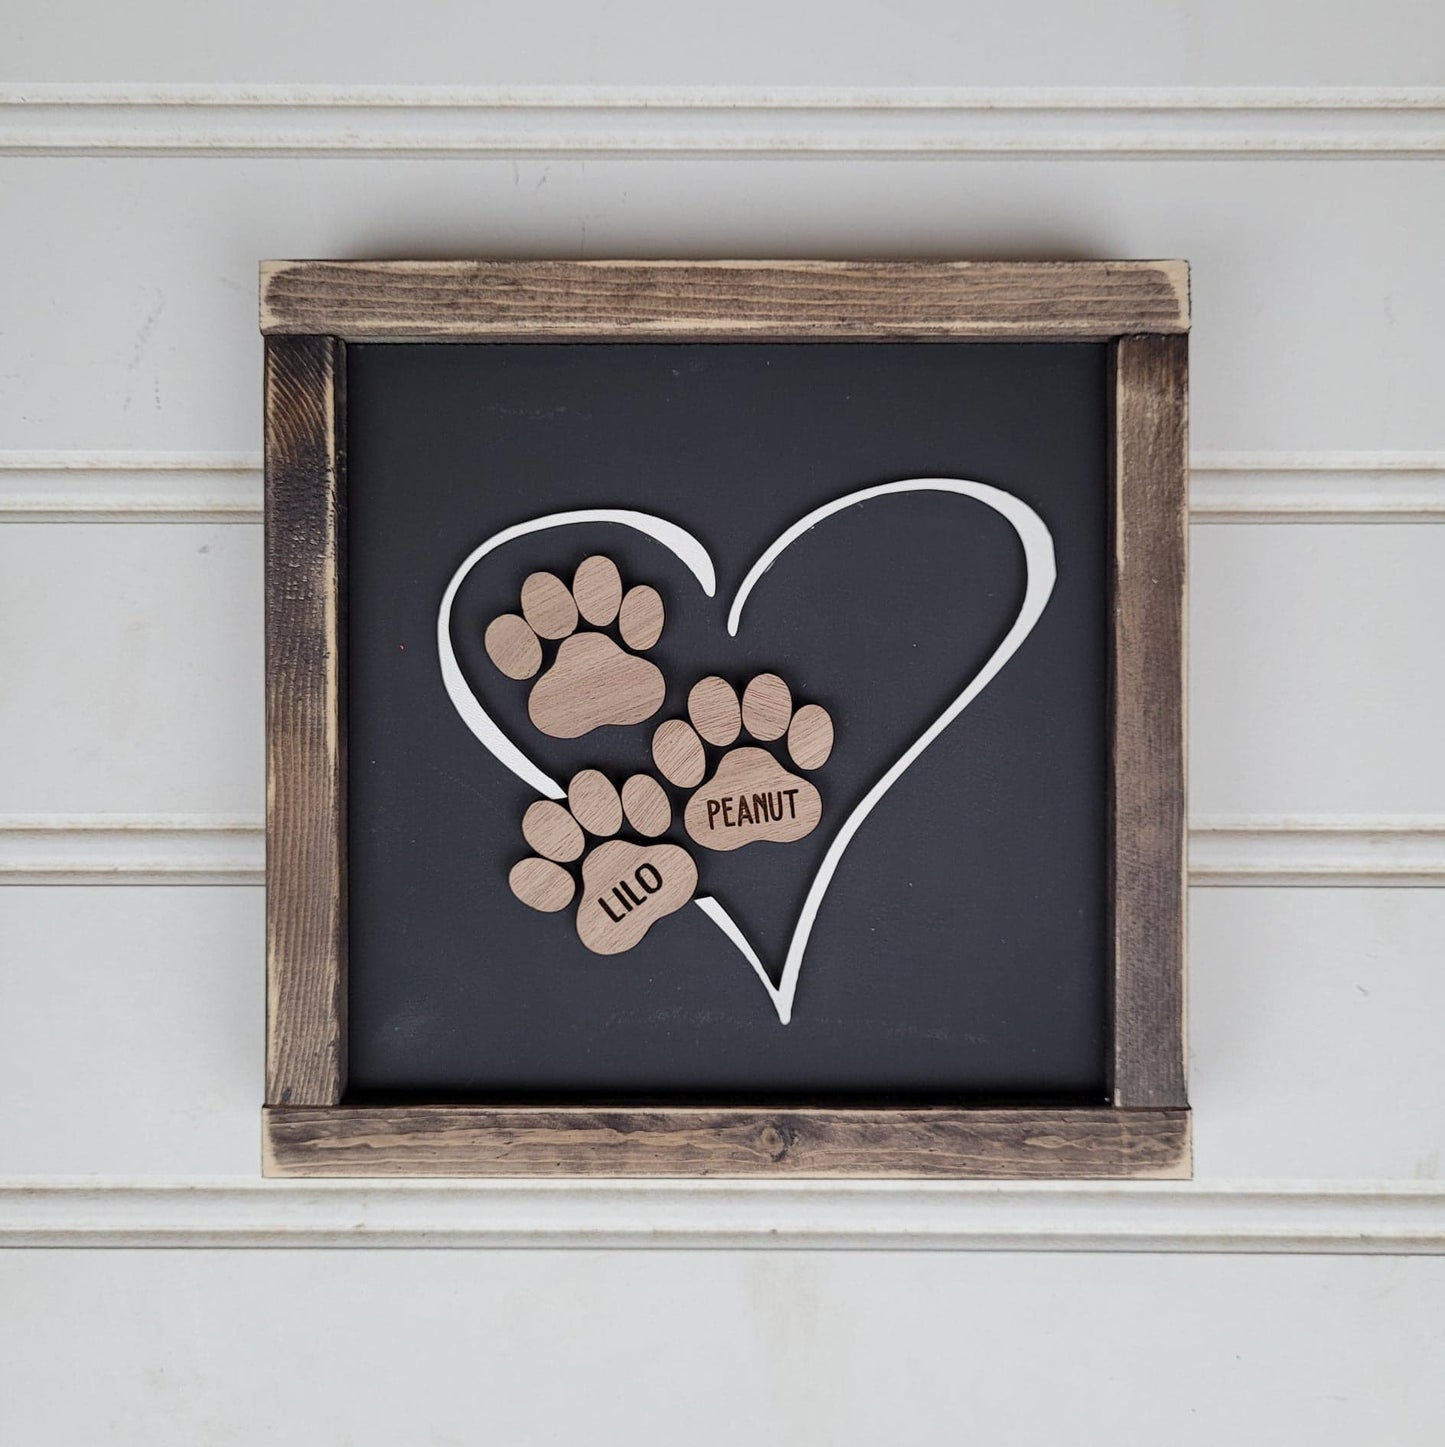 Paw Print Heart - Personalized